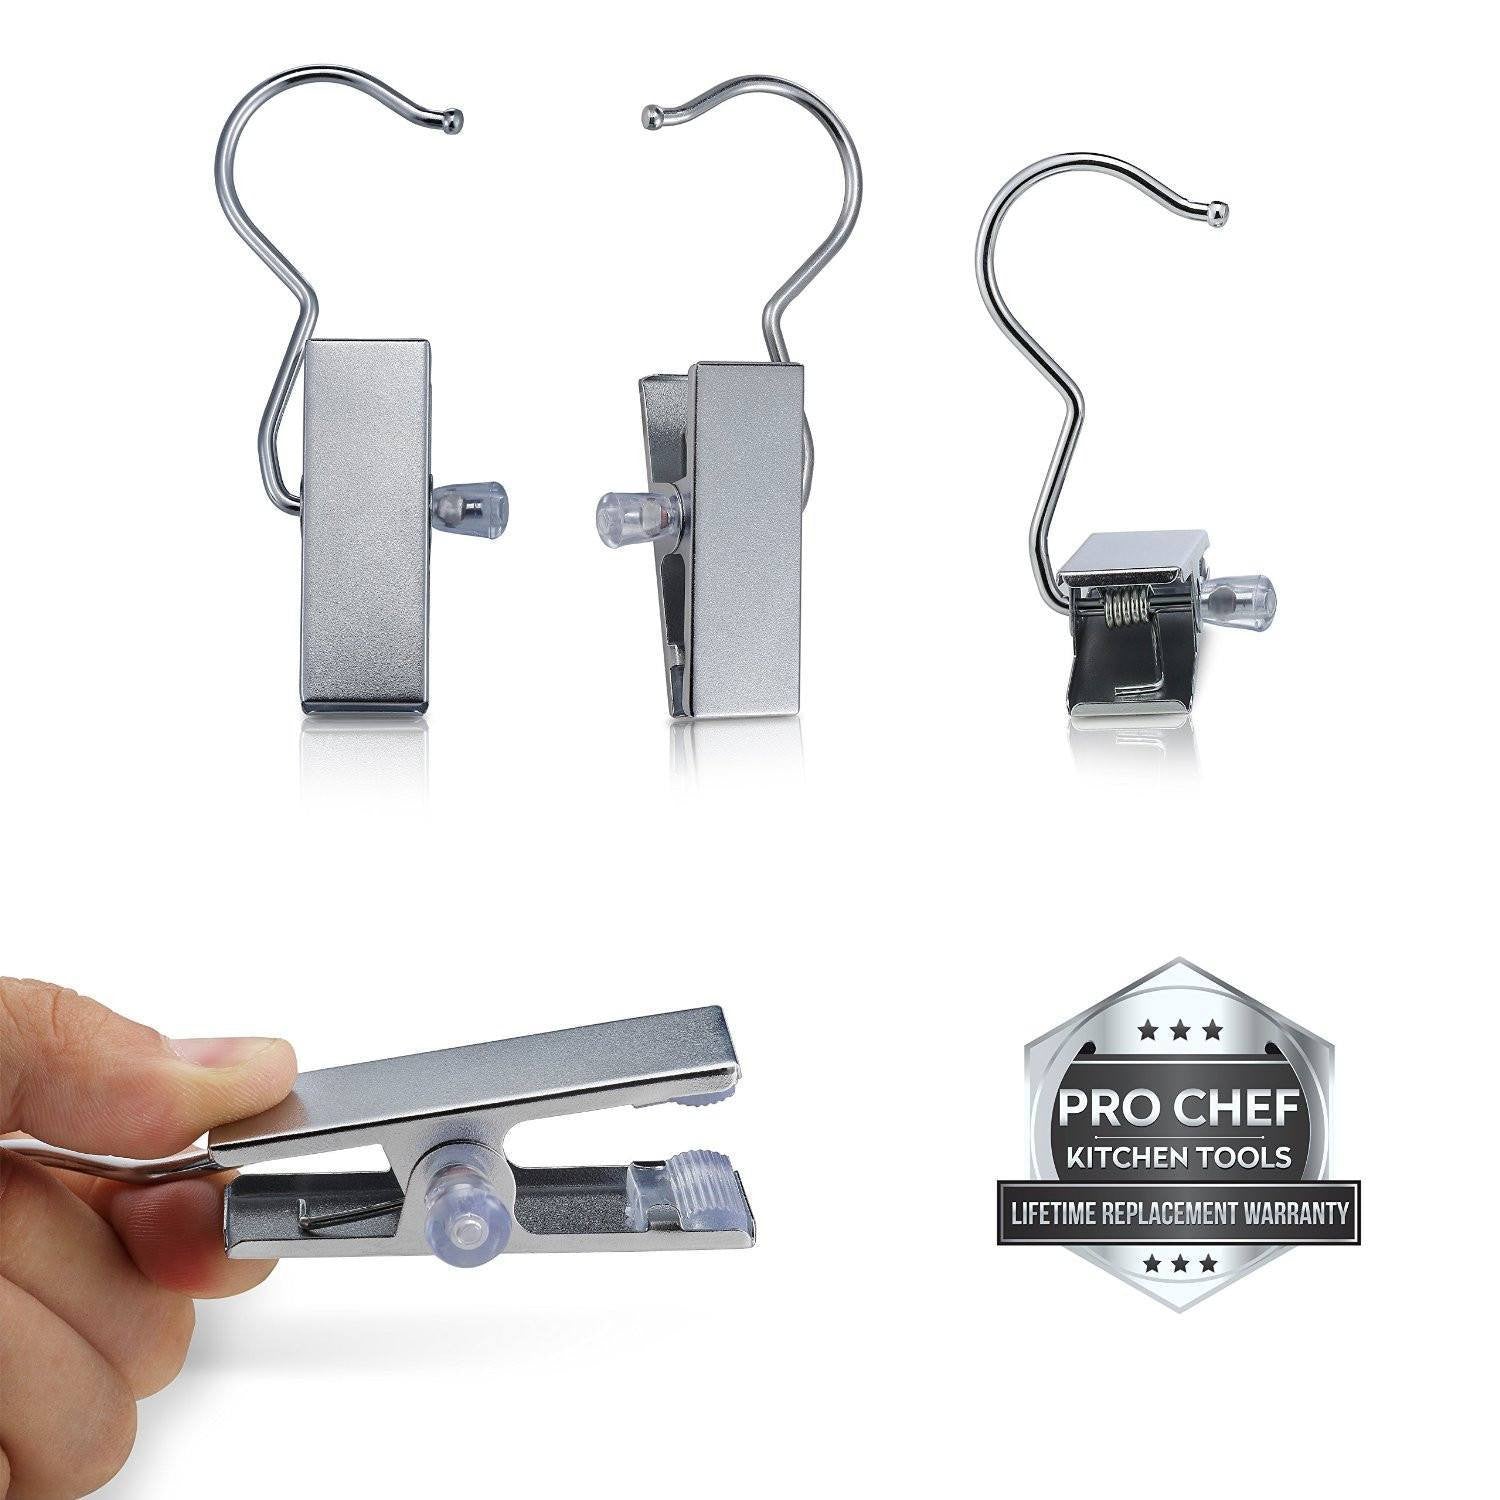 Buy now Pro Chef Kitchen Tools Stainless Steel Hanging Clip Hook - Set of  10 B – Pro Chef Kitchen Tools